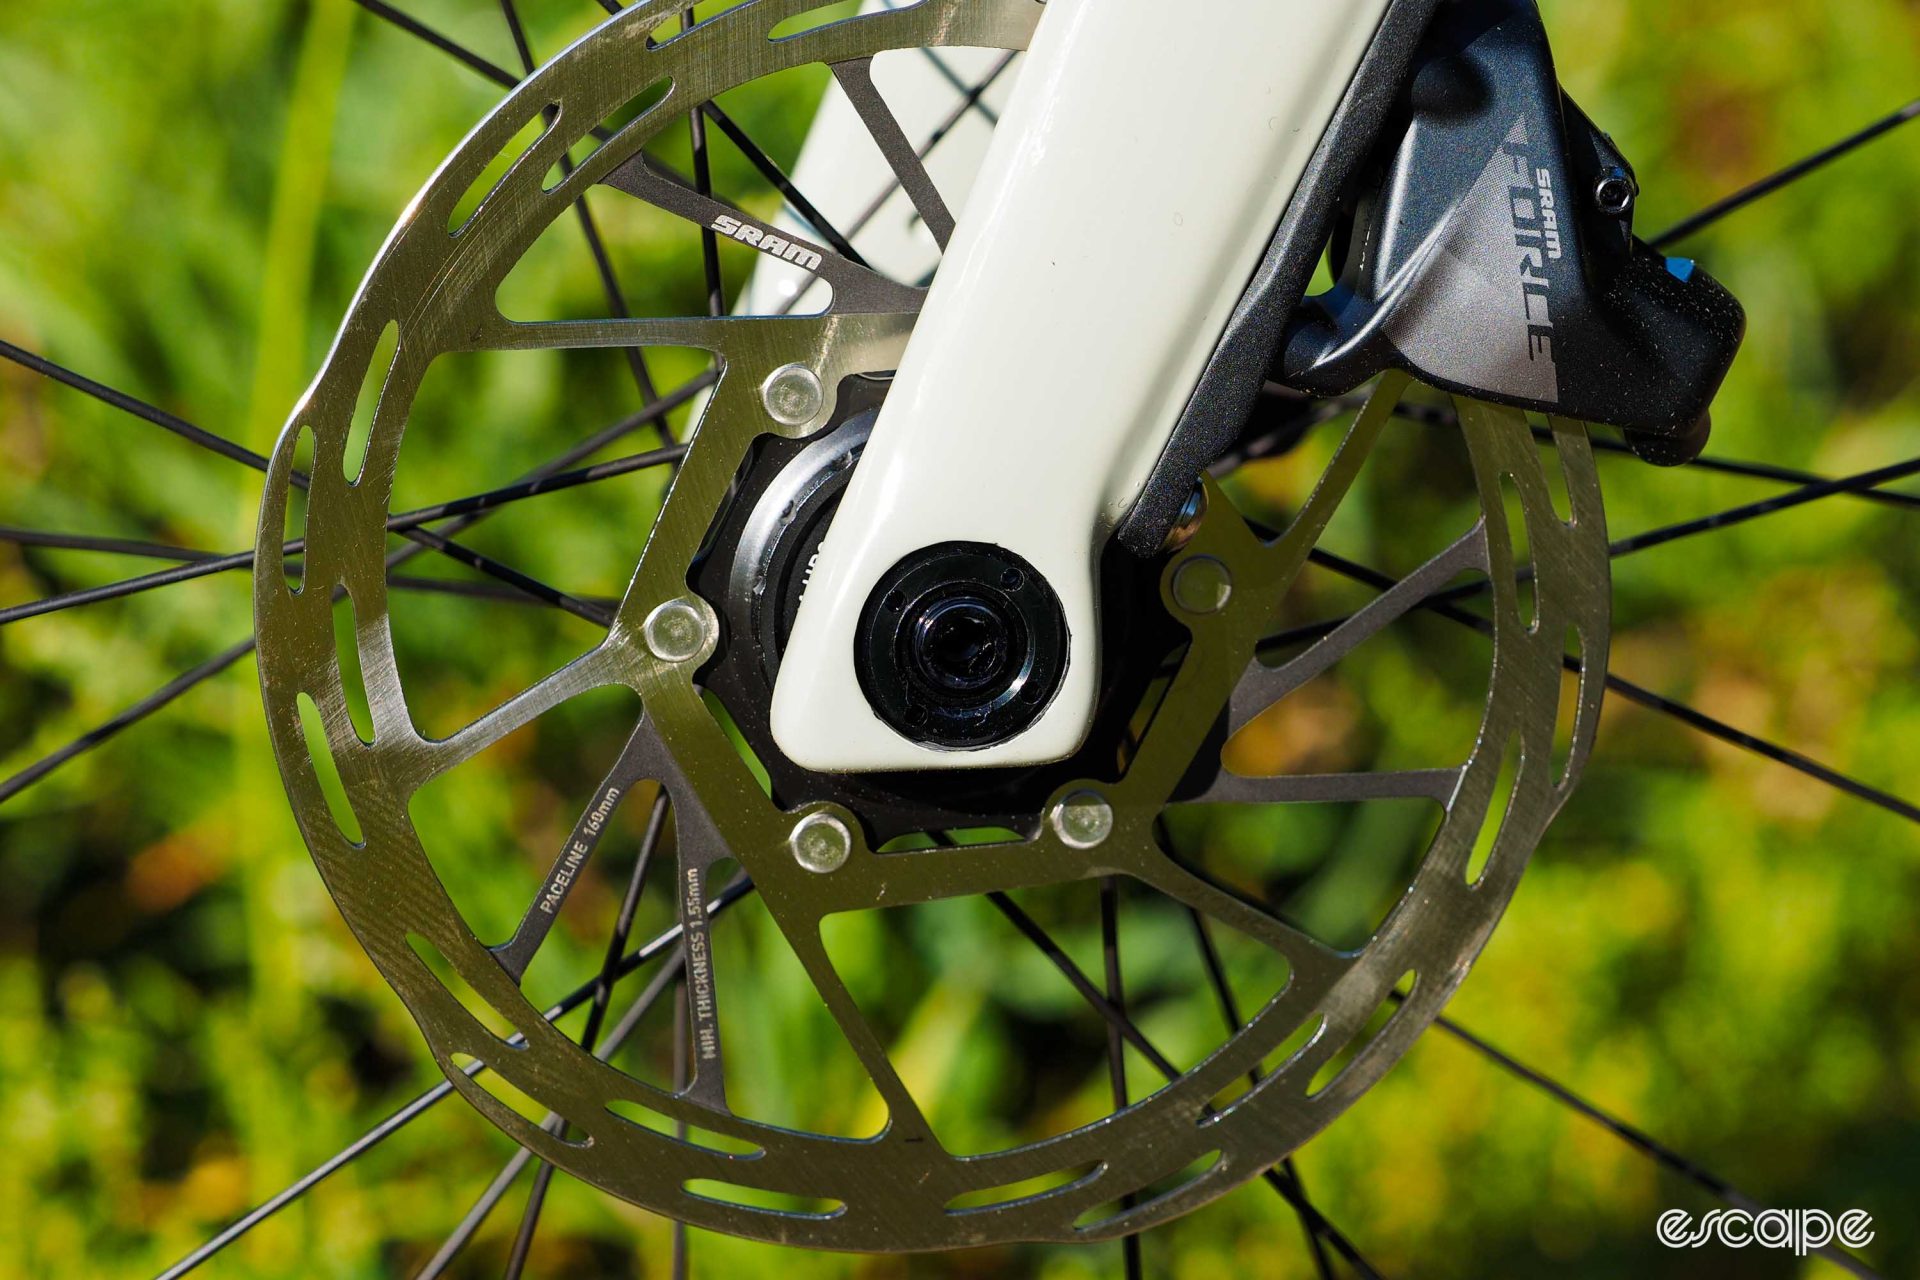 The through-axle and dropout of the fork, with a flat-mount SRAM Force caliper.